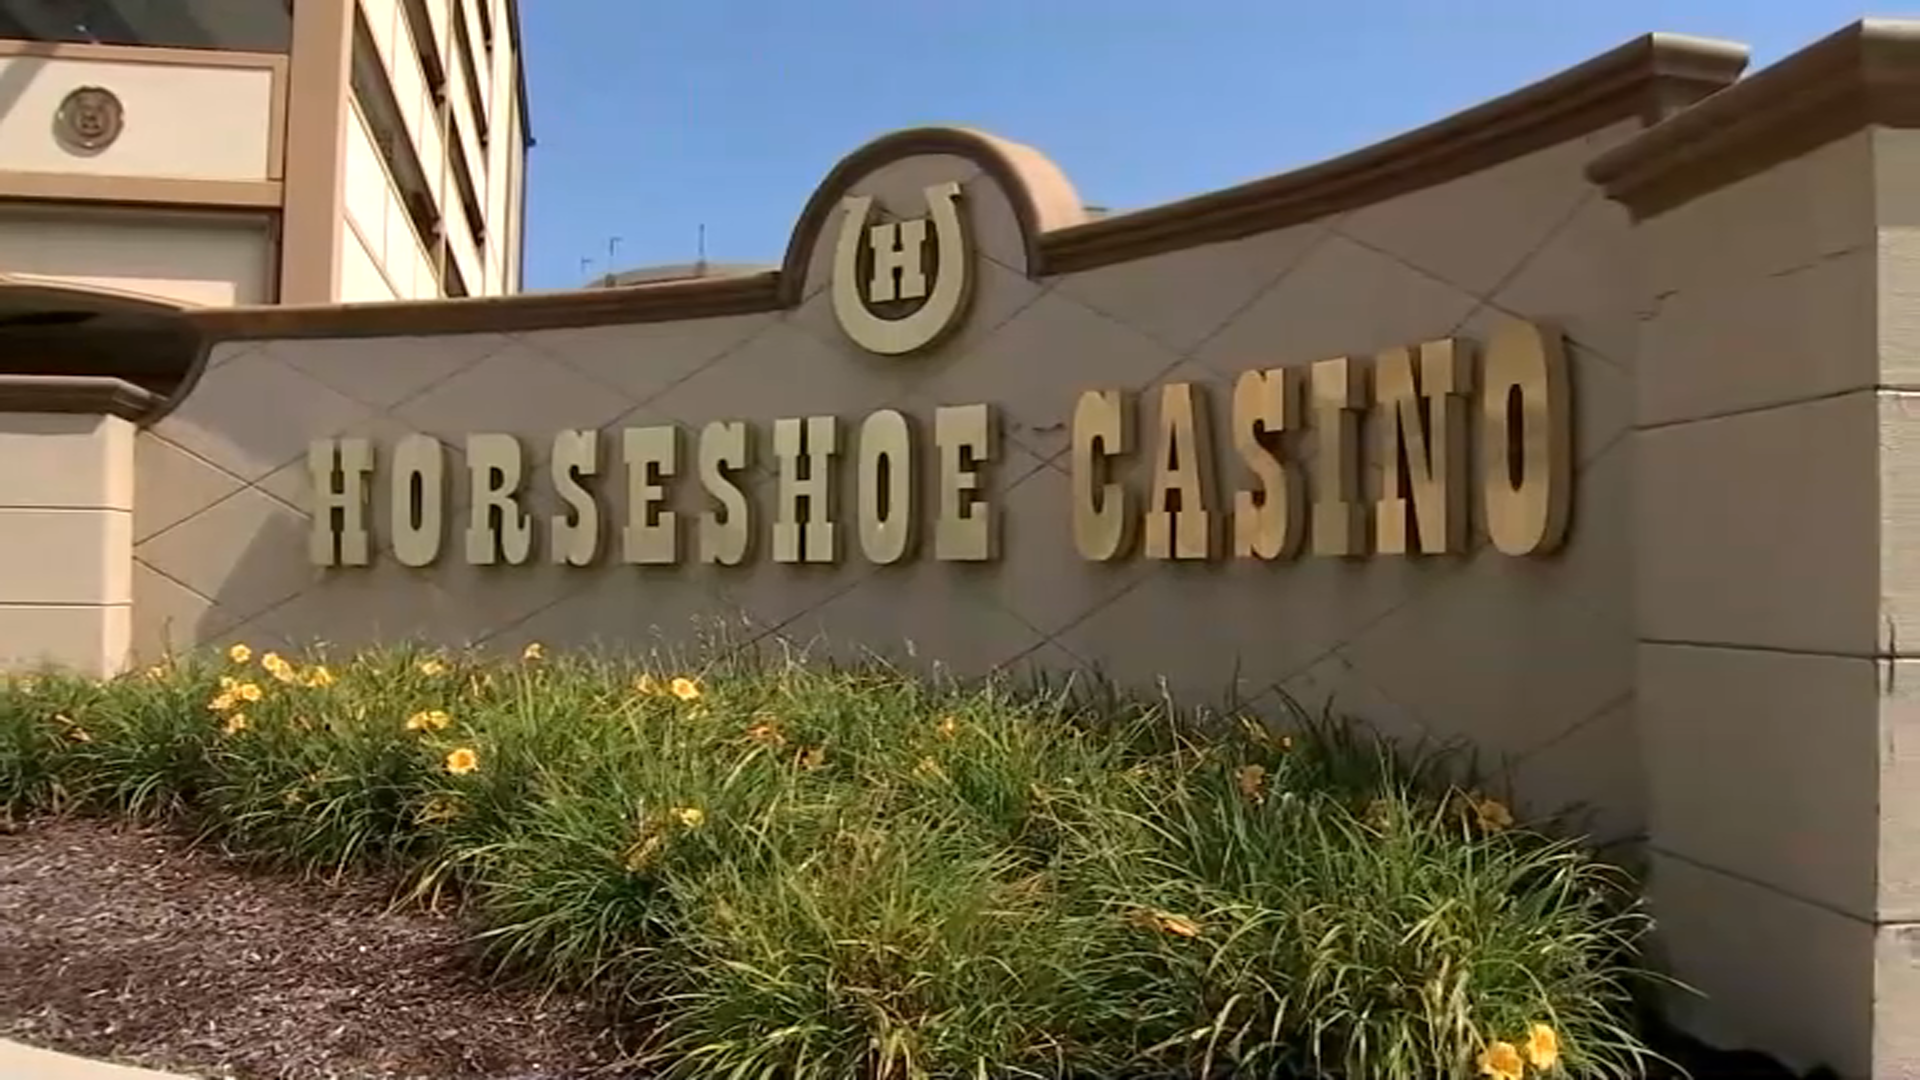 horseshoe casino downtown chicago location and address